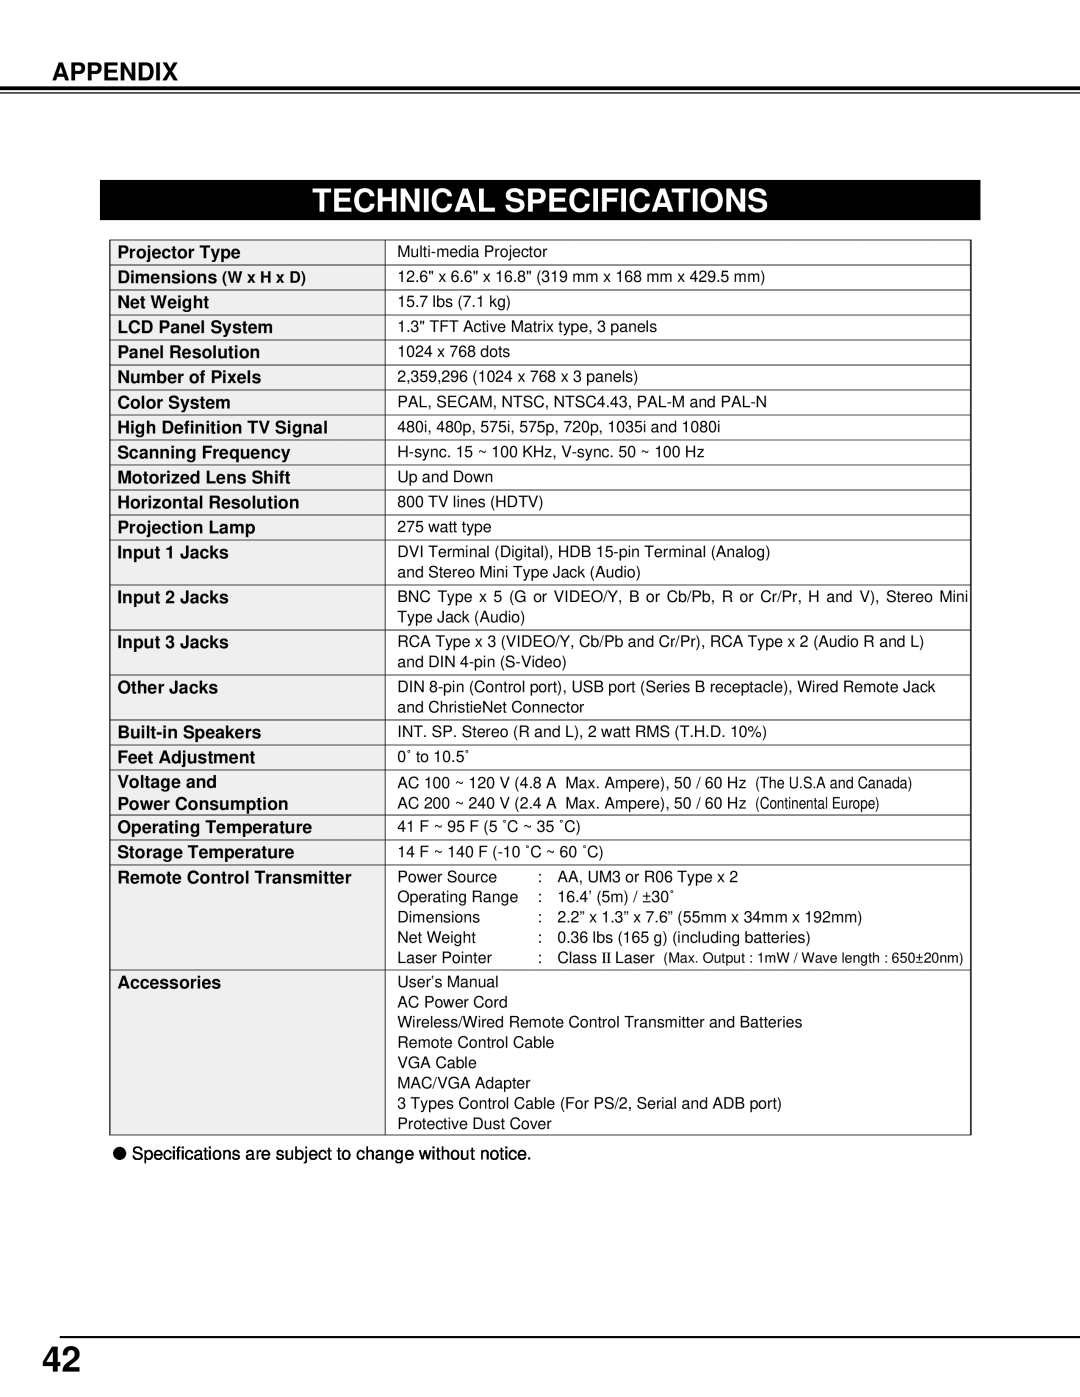 Christie Digital Systems 38-VIV205-01 user manual Technical Specifications, Appendix 